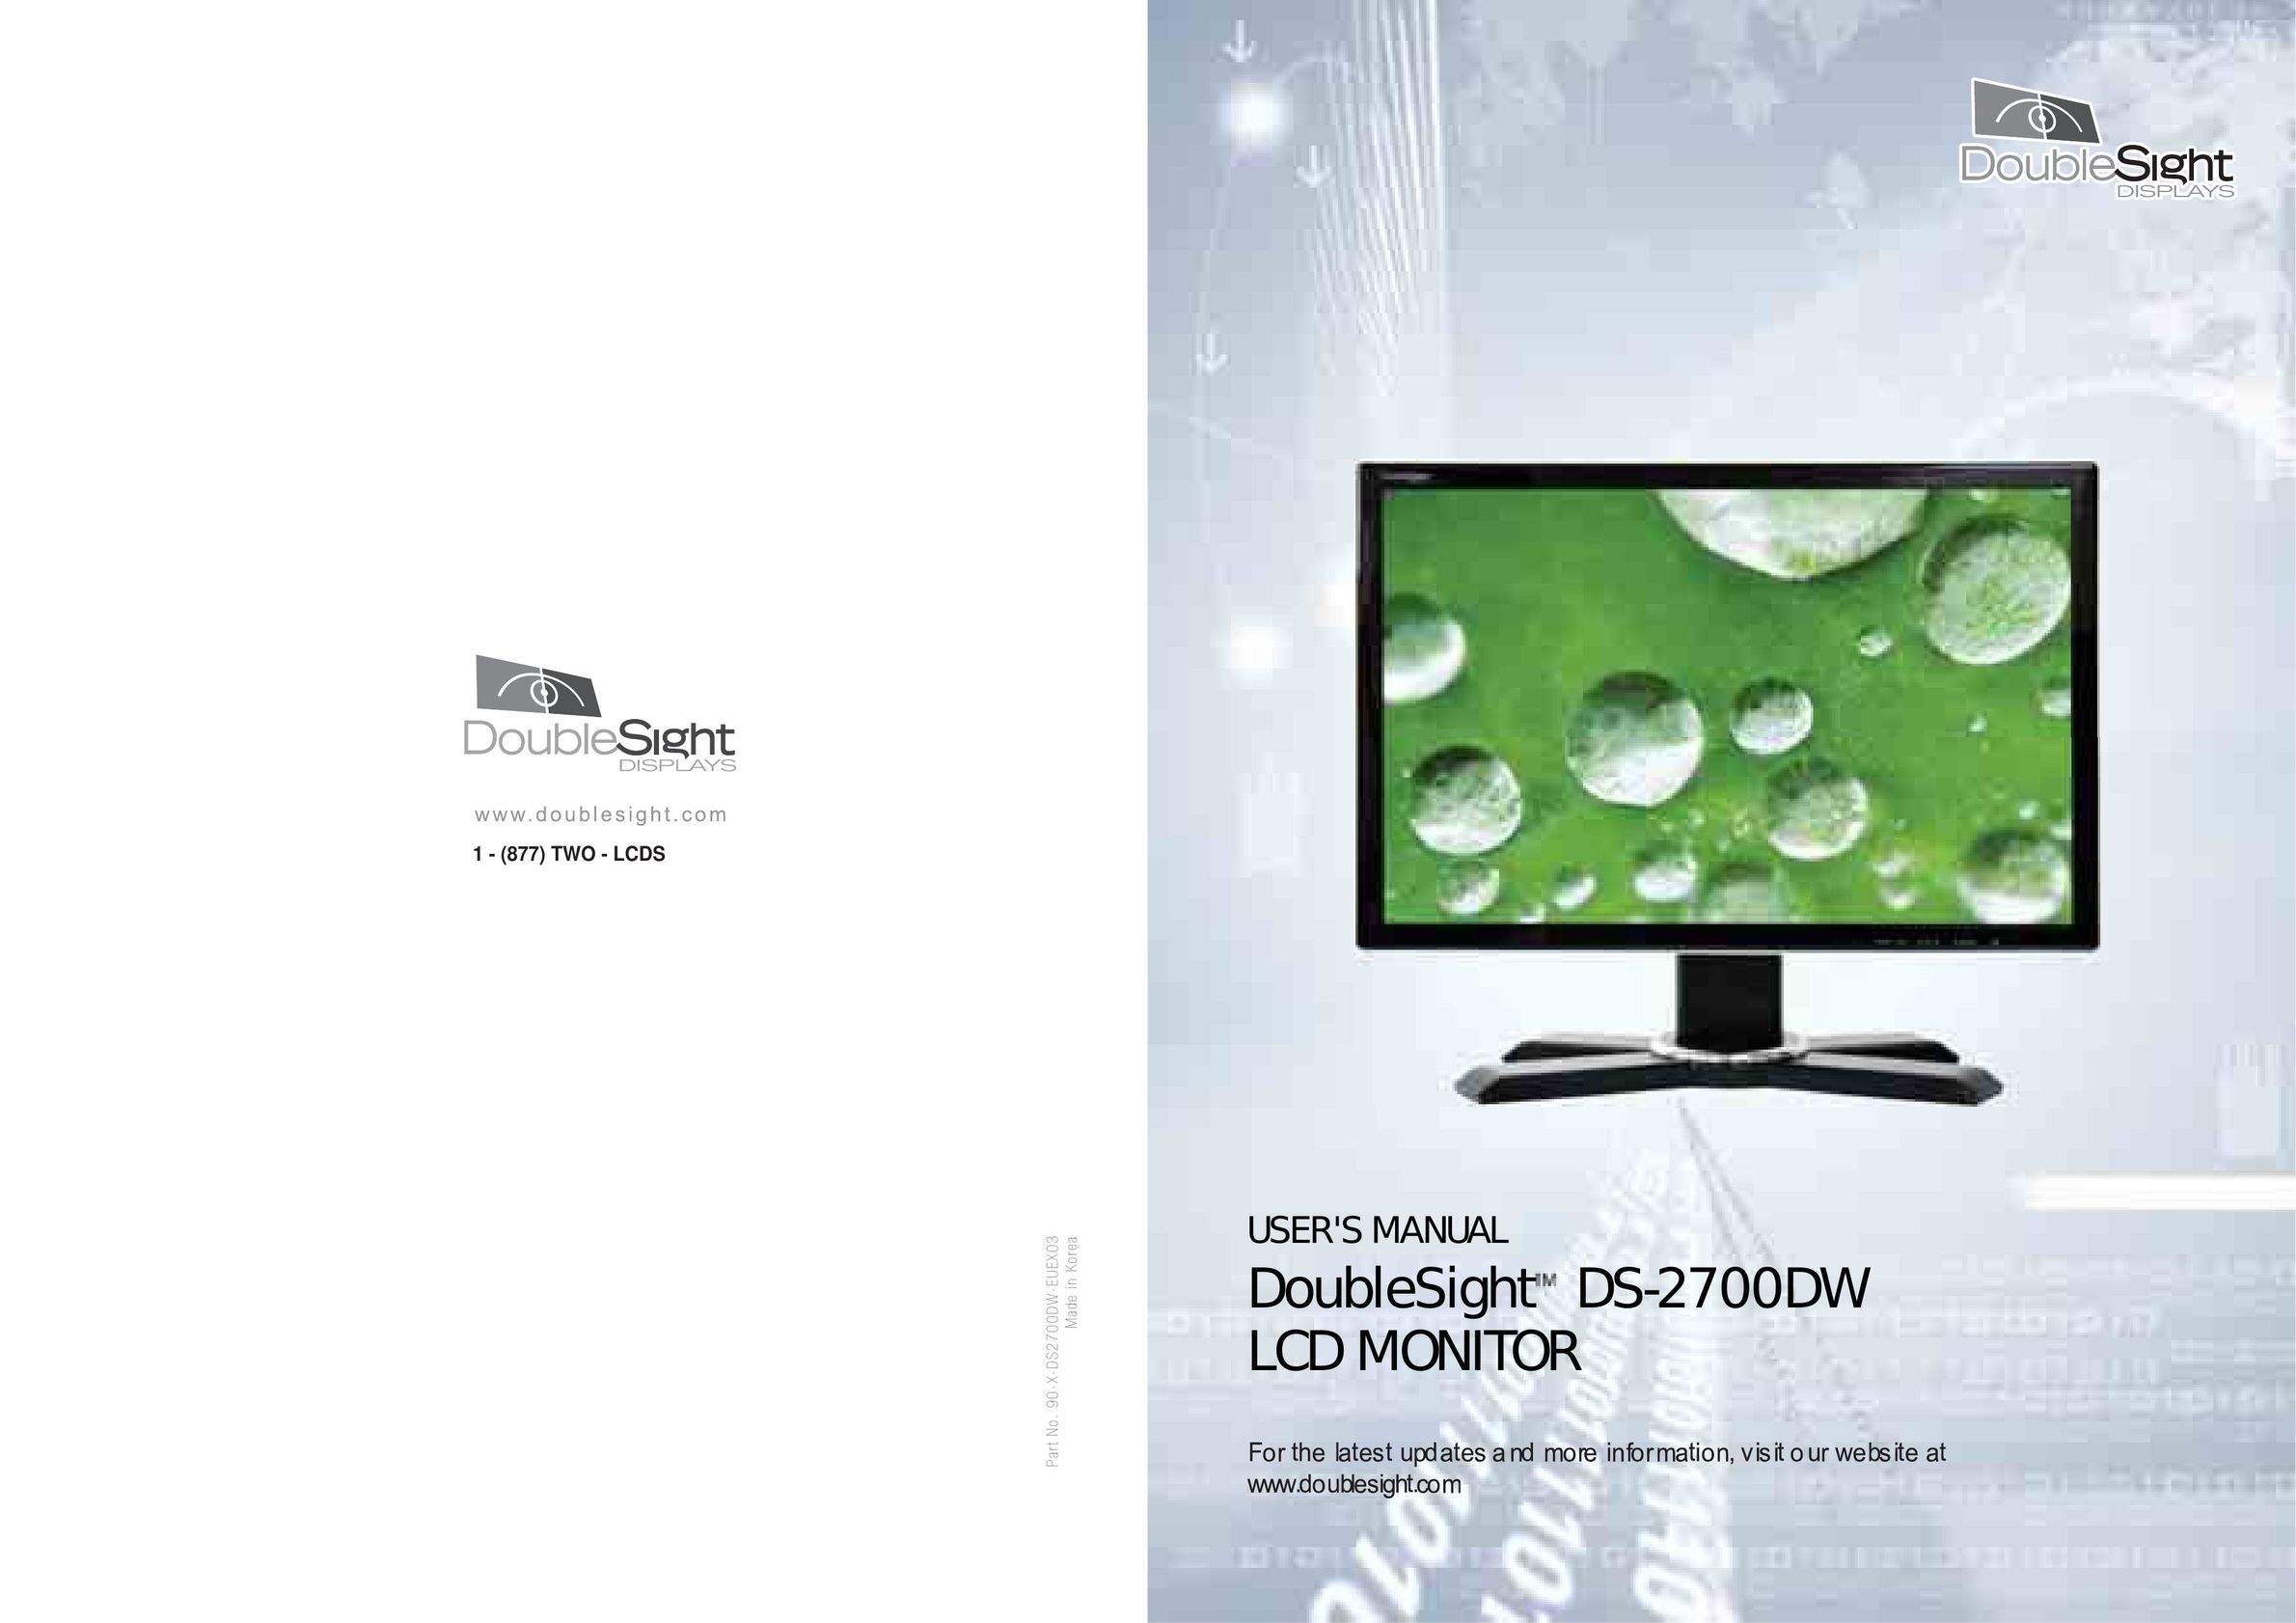 DoubleSight Displays DoubleSight LCD Monitor Computer Monitor User Manual